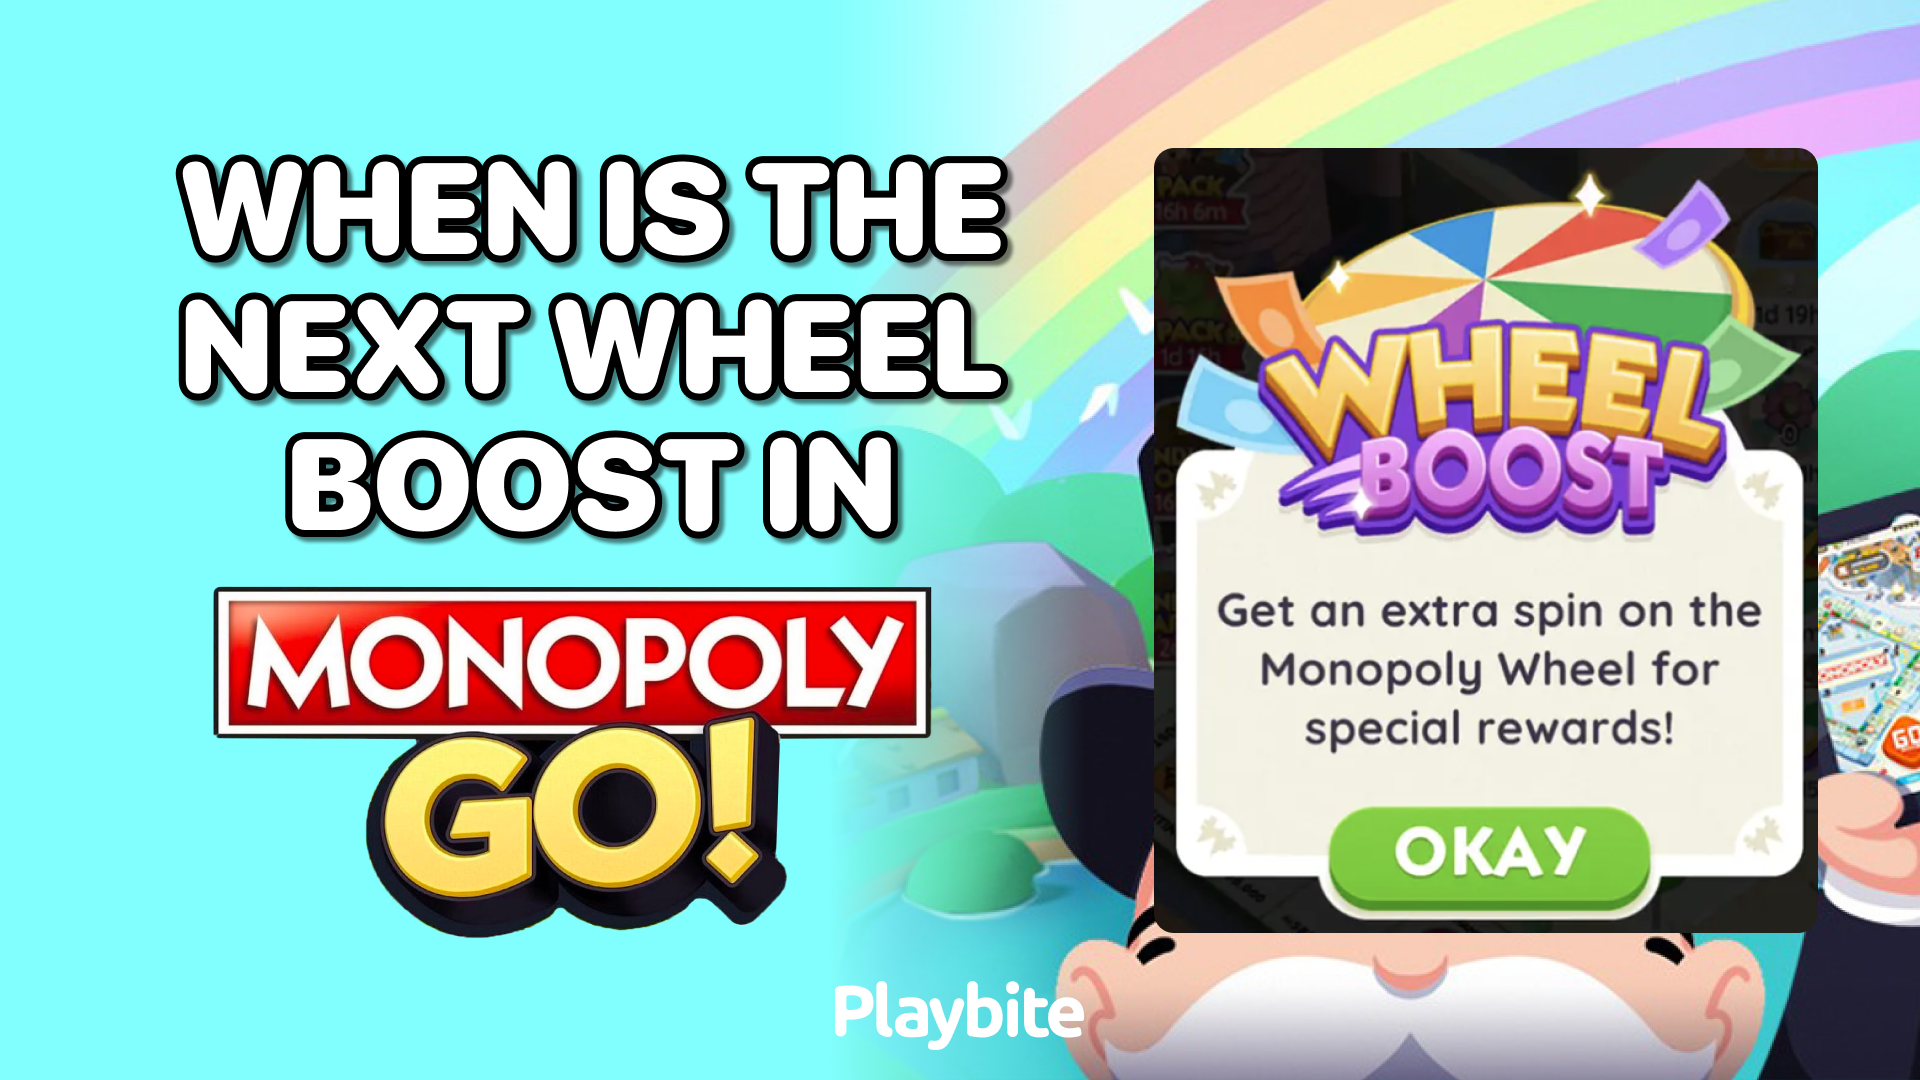 When Is the Next Wheel Boost in Monopoly Go?